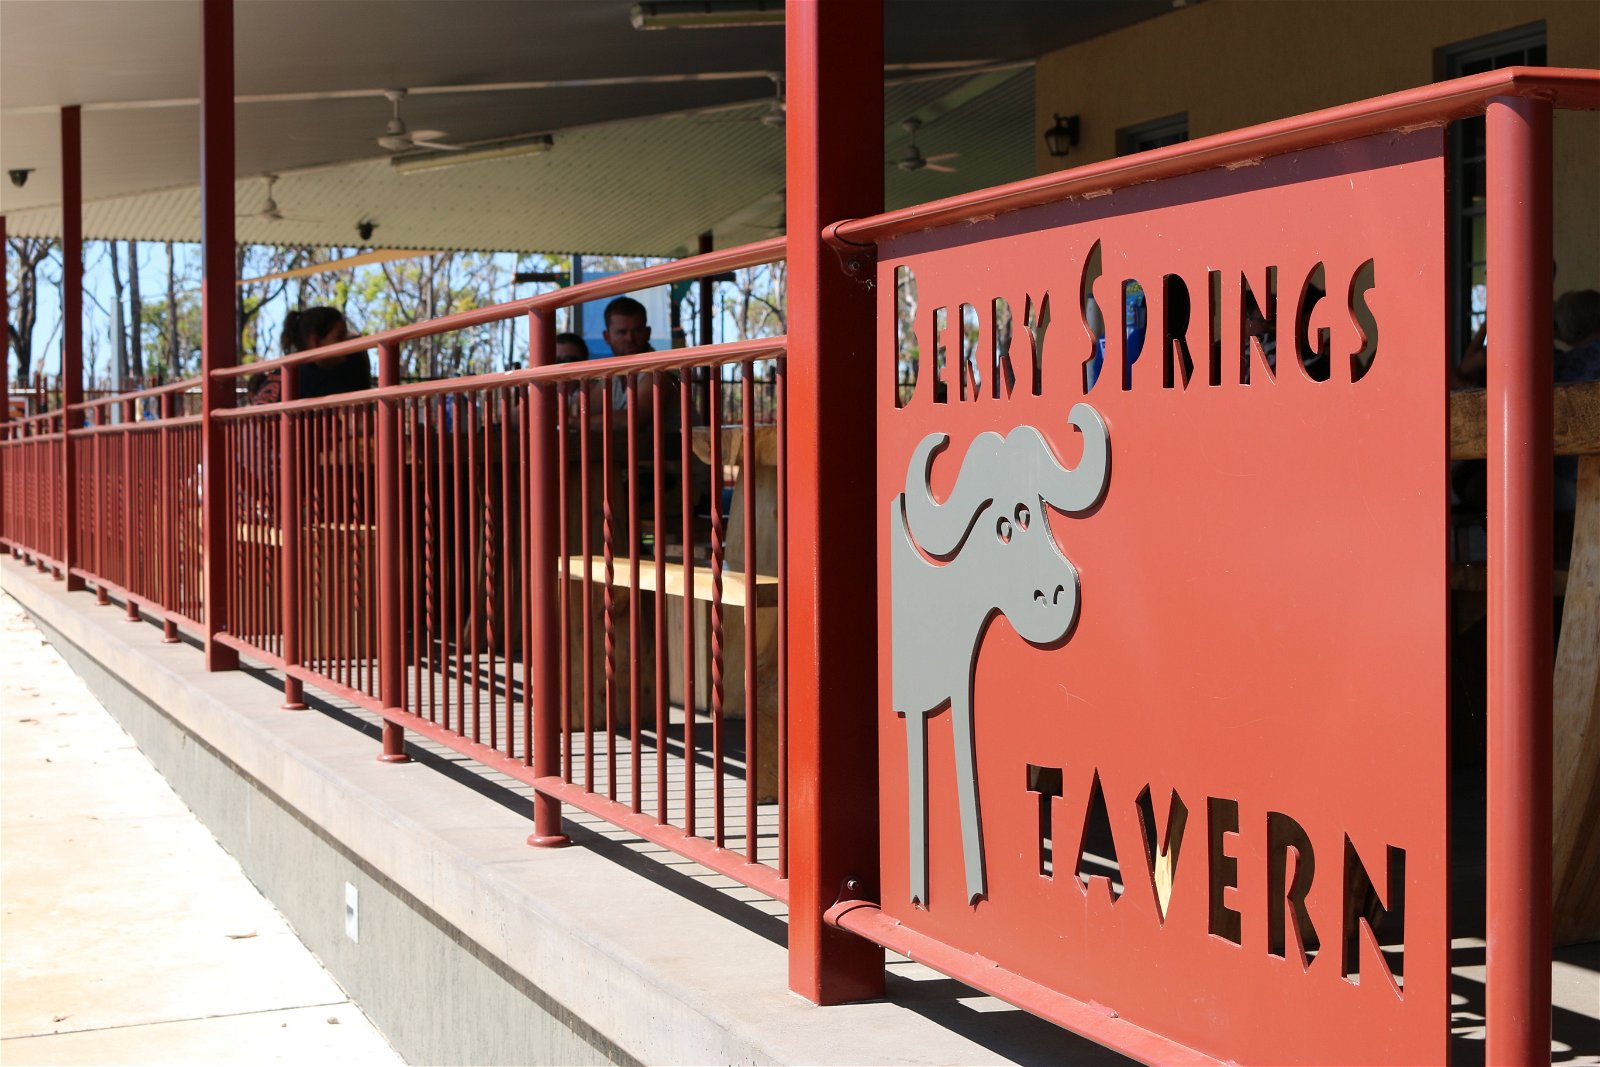 Berry Springs Tavern - New South Wales Tourism 